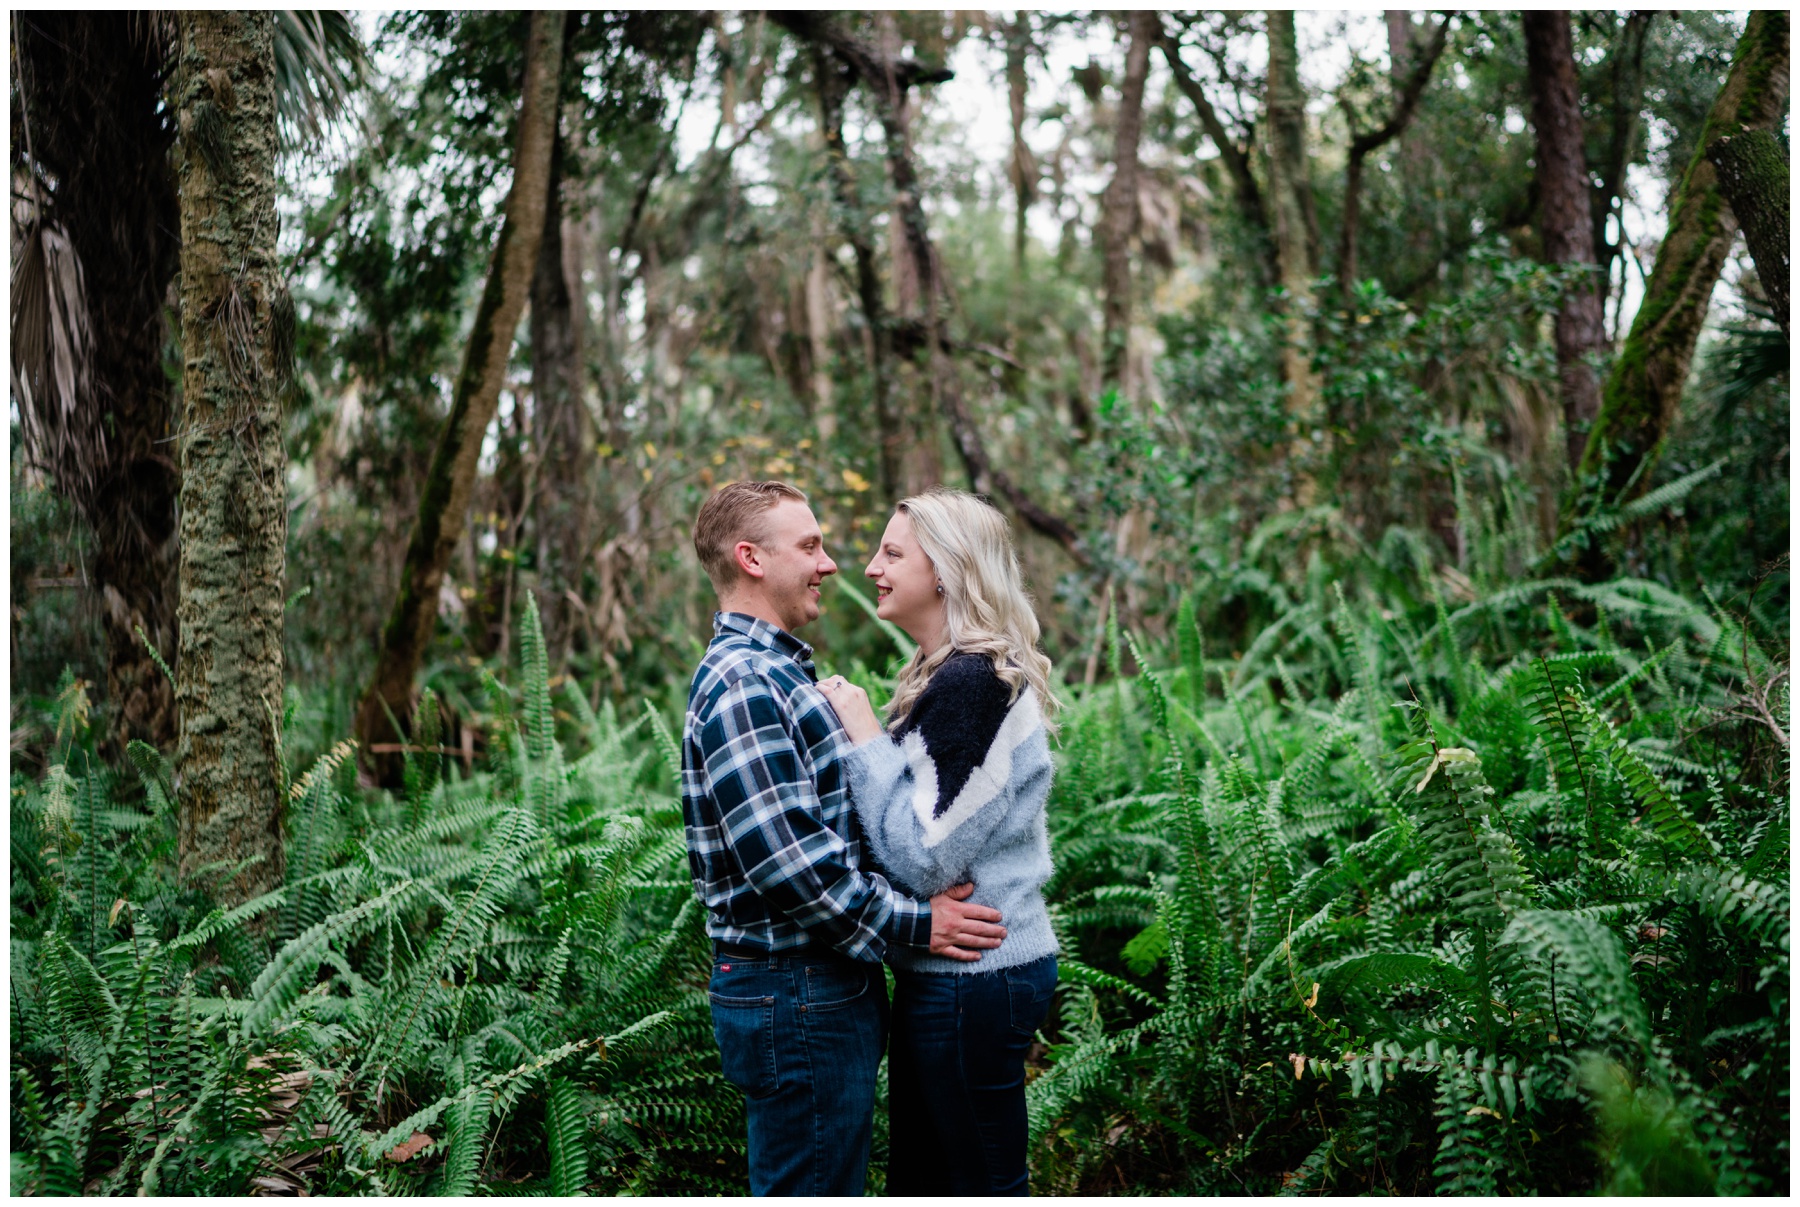 Couple embraces in swap greenery during Florida photoshoot.